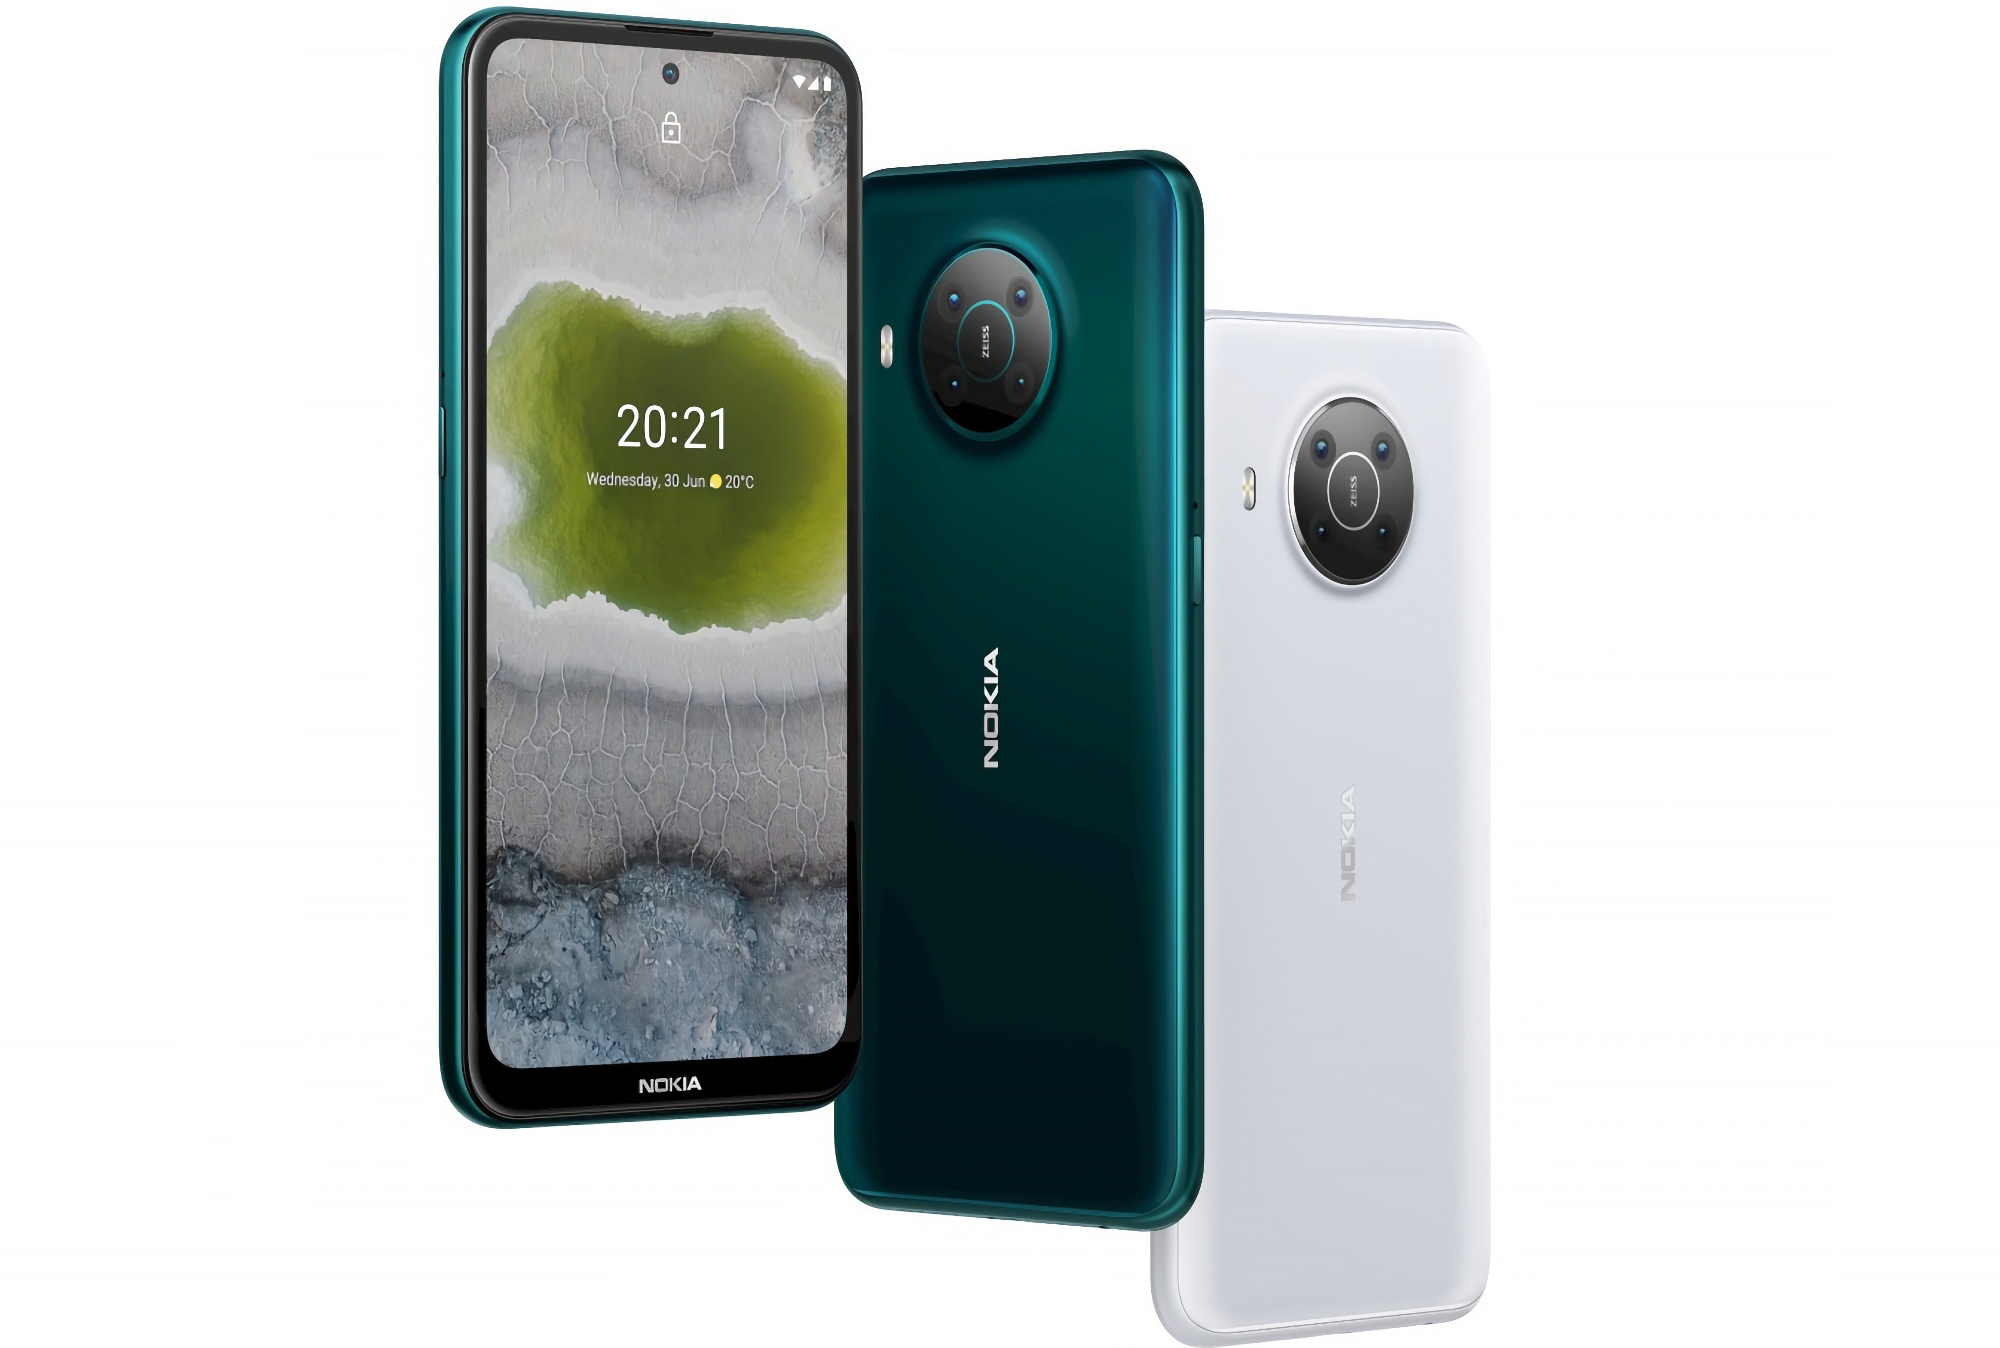 Nokia X20 and Nokia X10 receive new software update based on Android 13